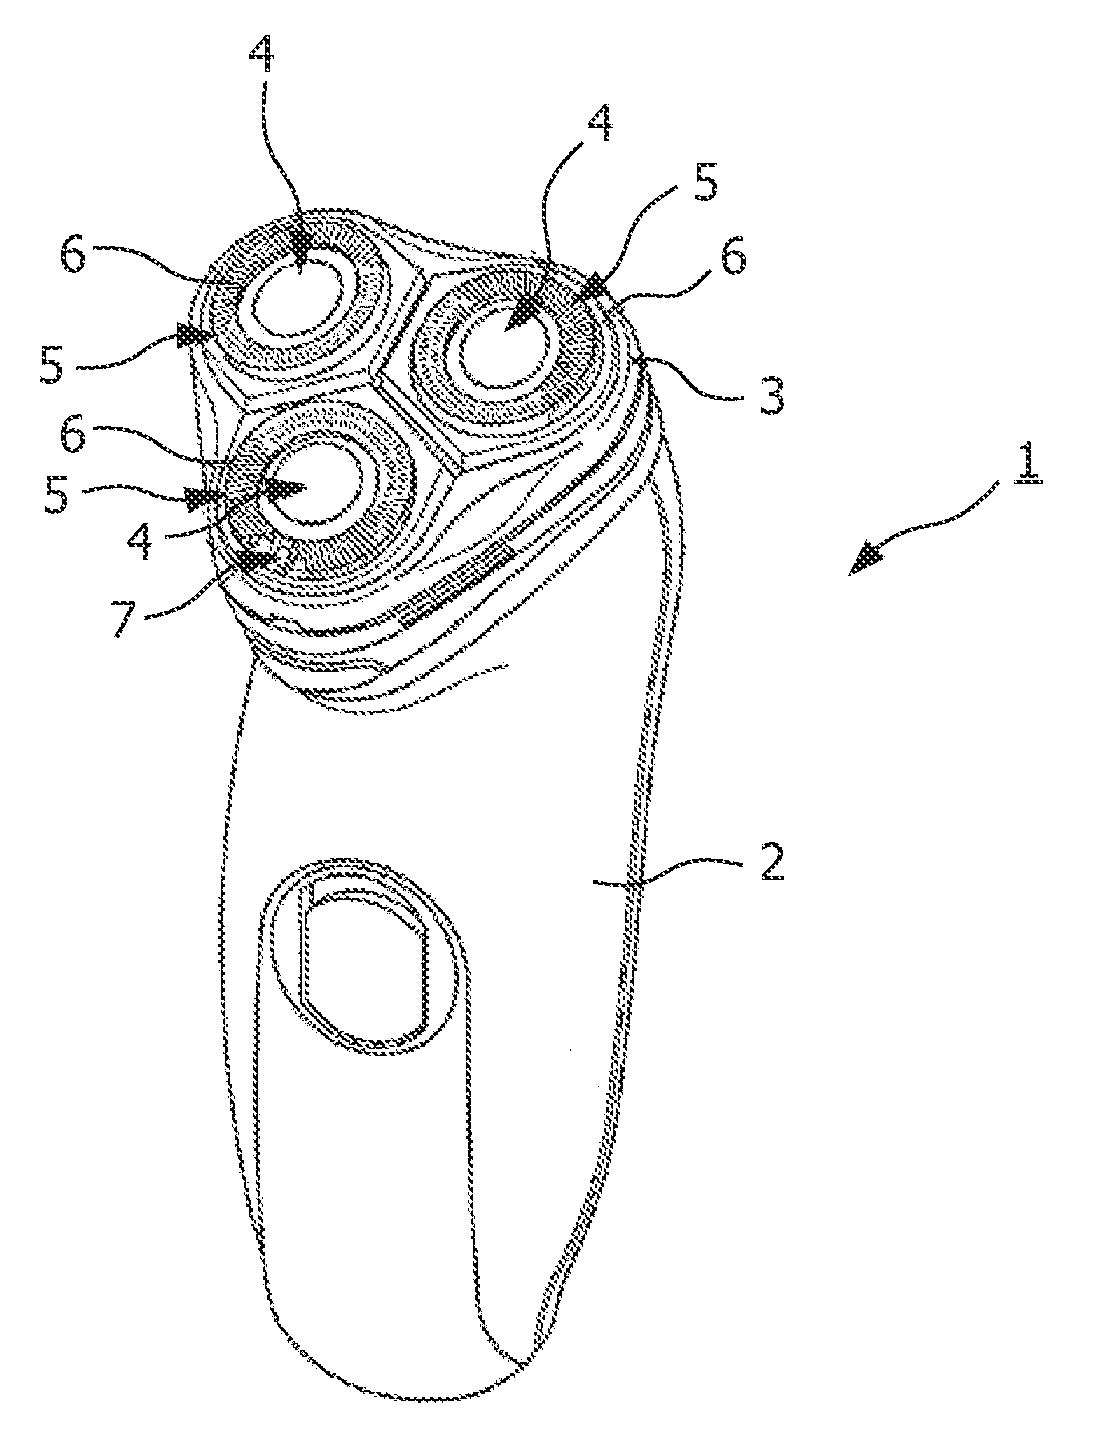 Carrier for a shaving device, comprising pairs of a cutting element and a hair lifting element